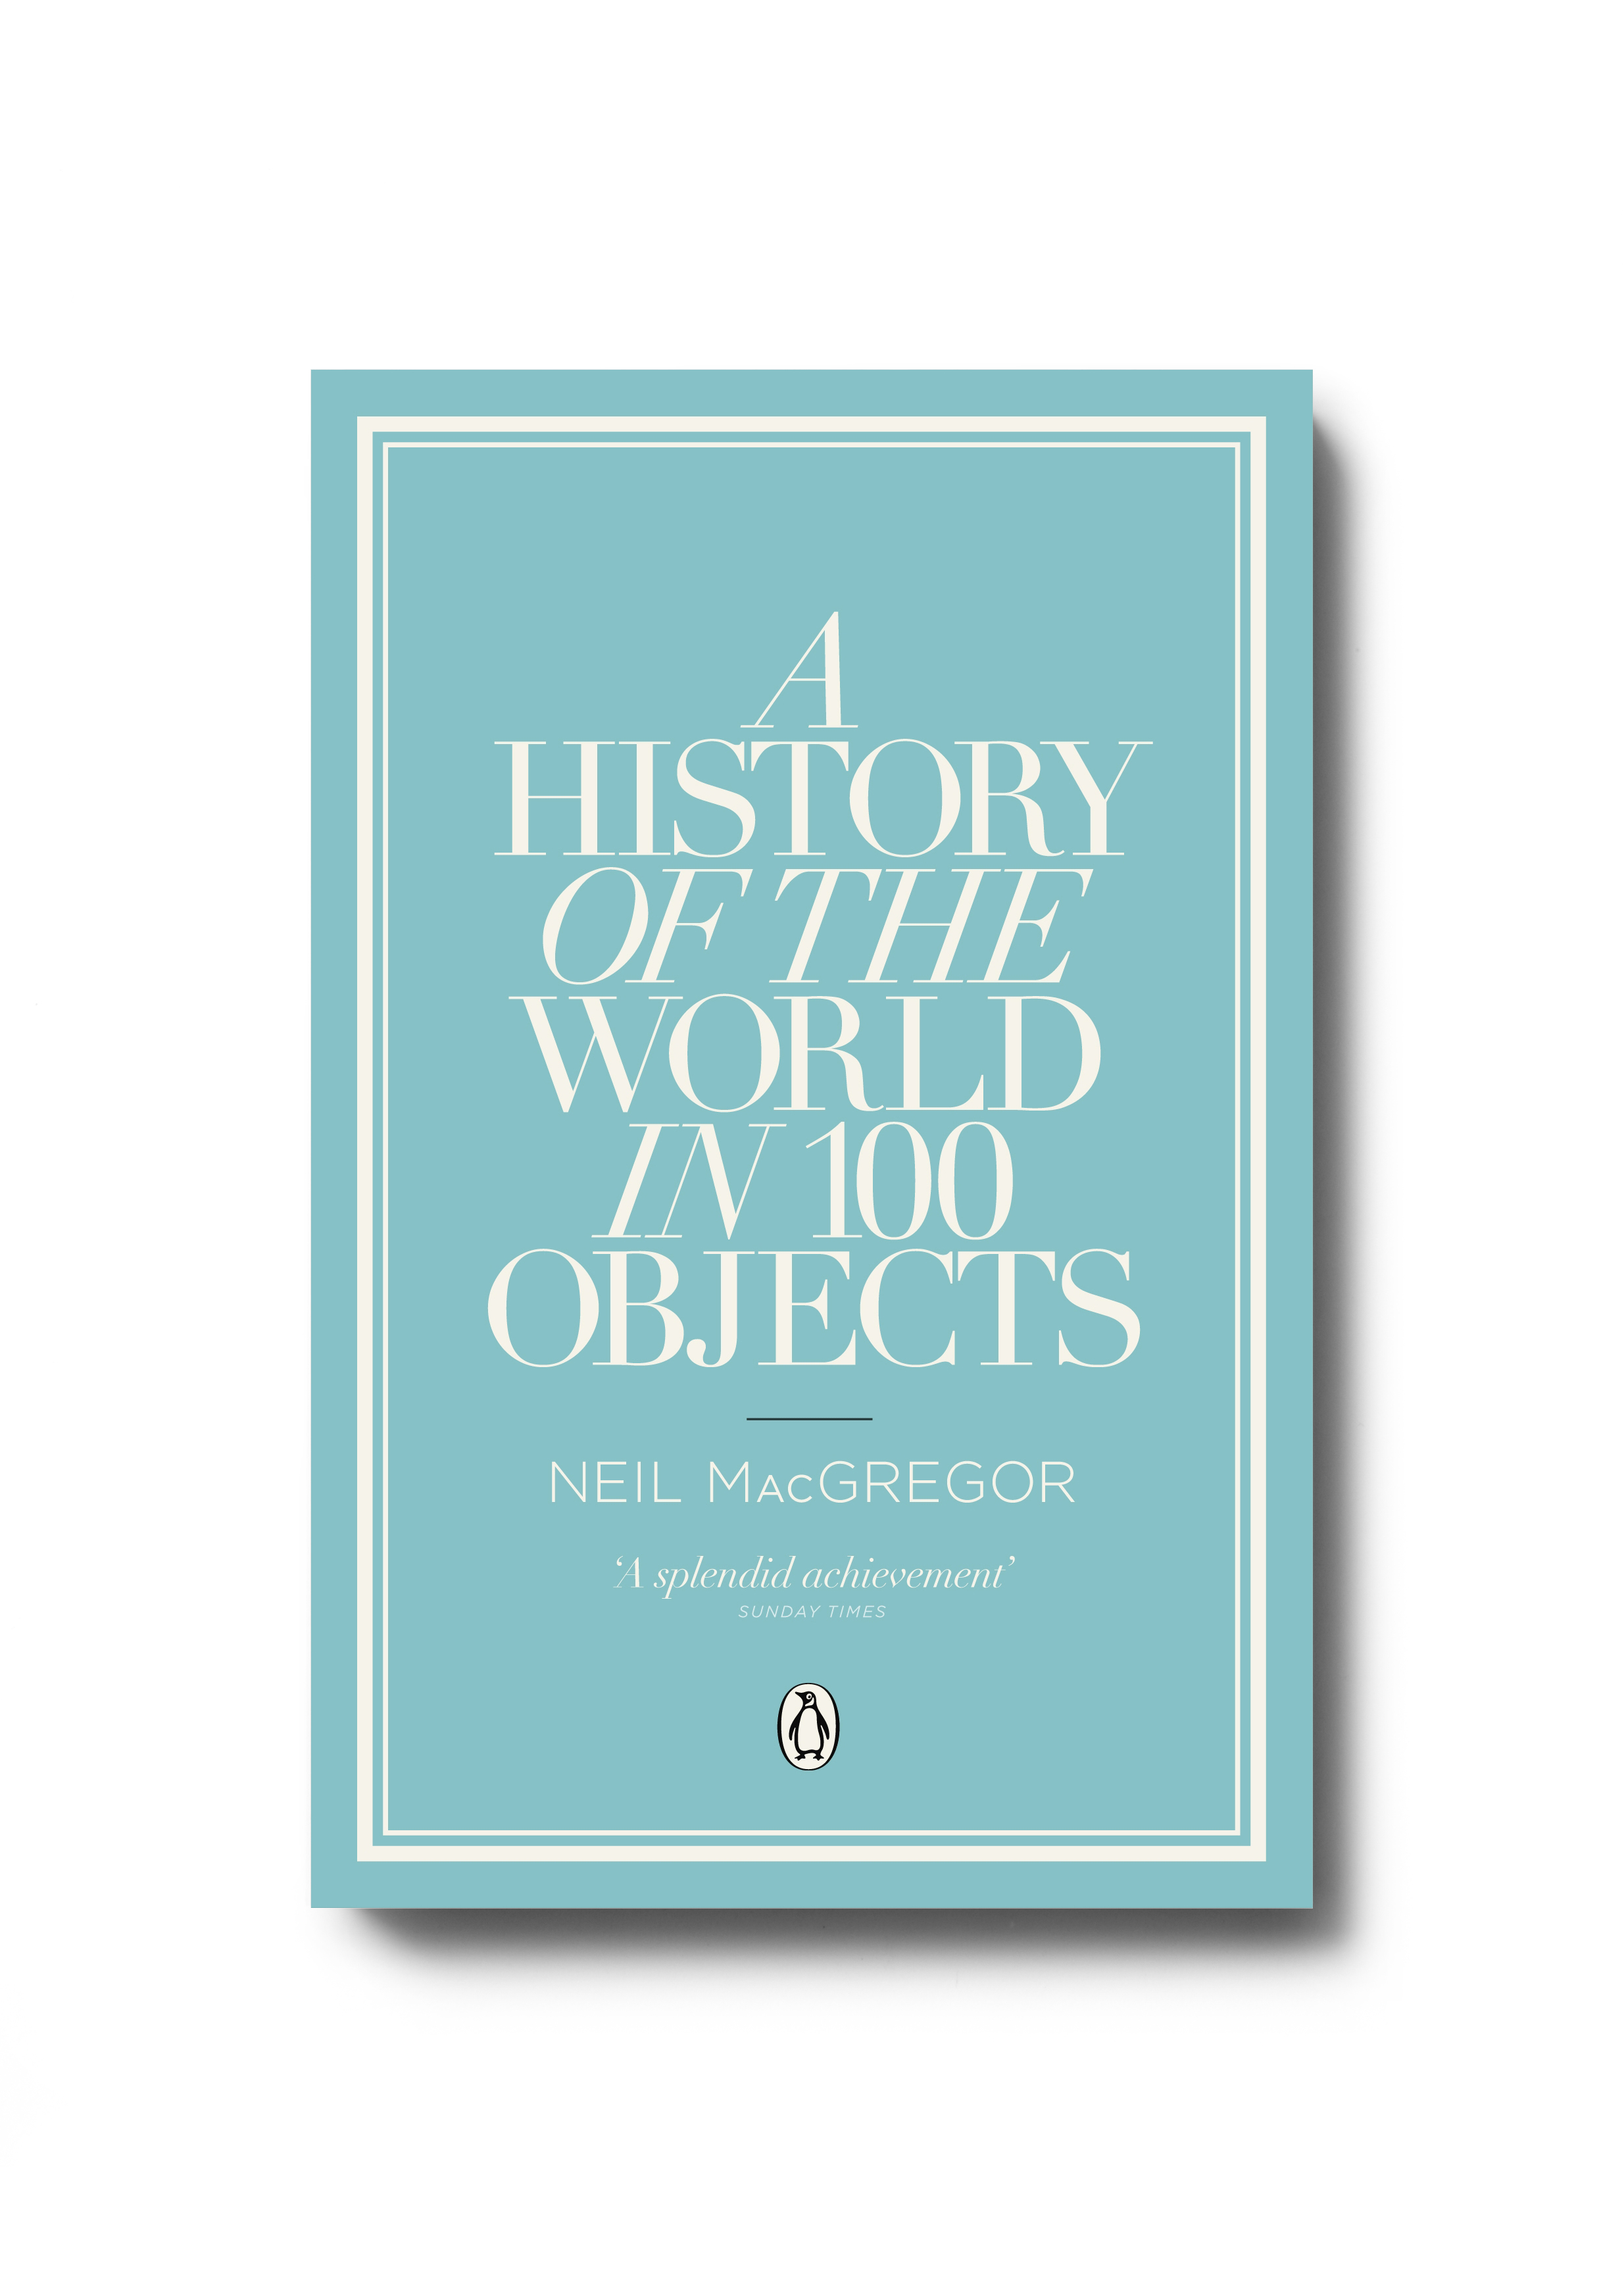  A History of the World in 100 Objects by Neil MacGregor (paperback) - Design: Jim Stoddart 